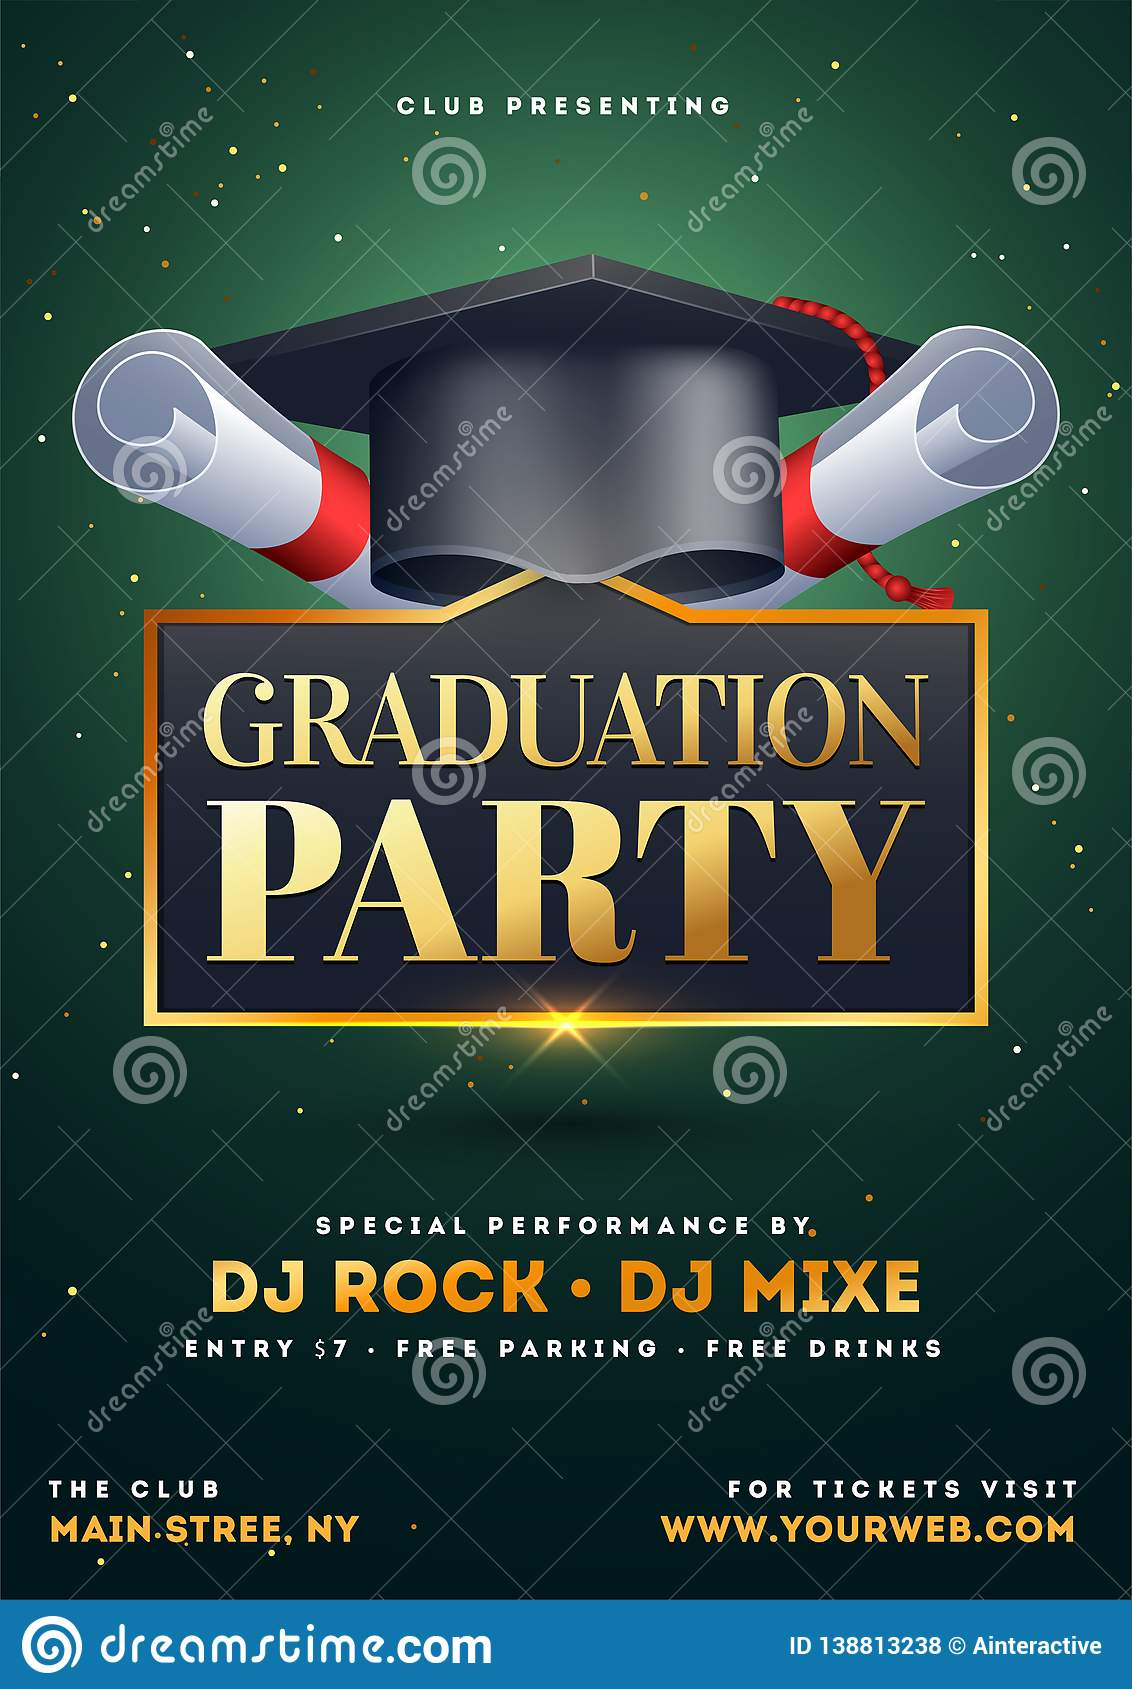 Graduation Party Template Or Flyer Design With Illustration Within Graduation Party Flyer Template